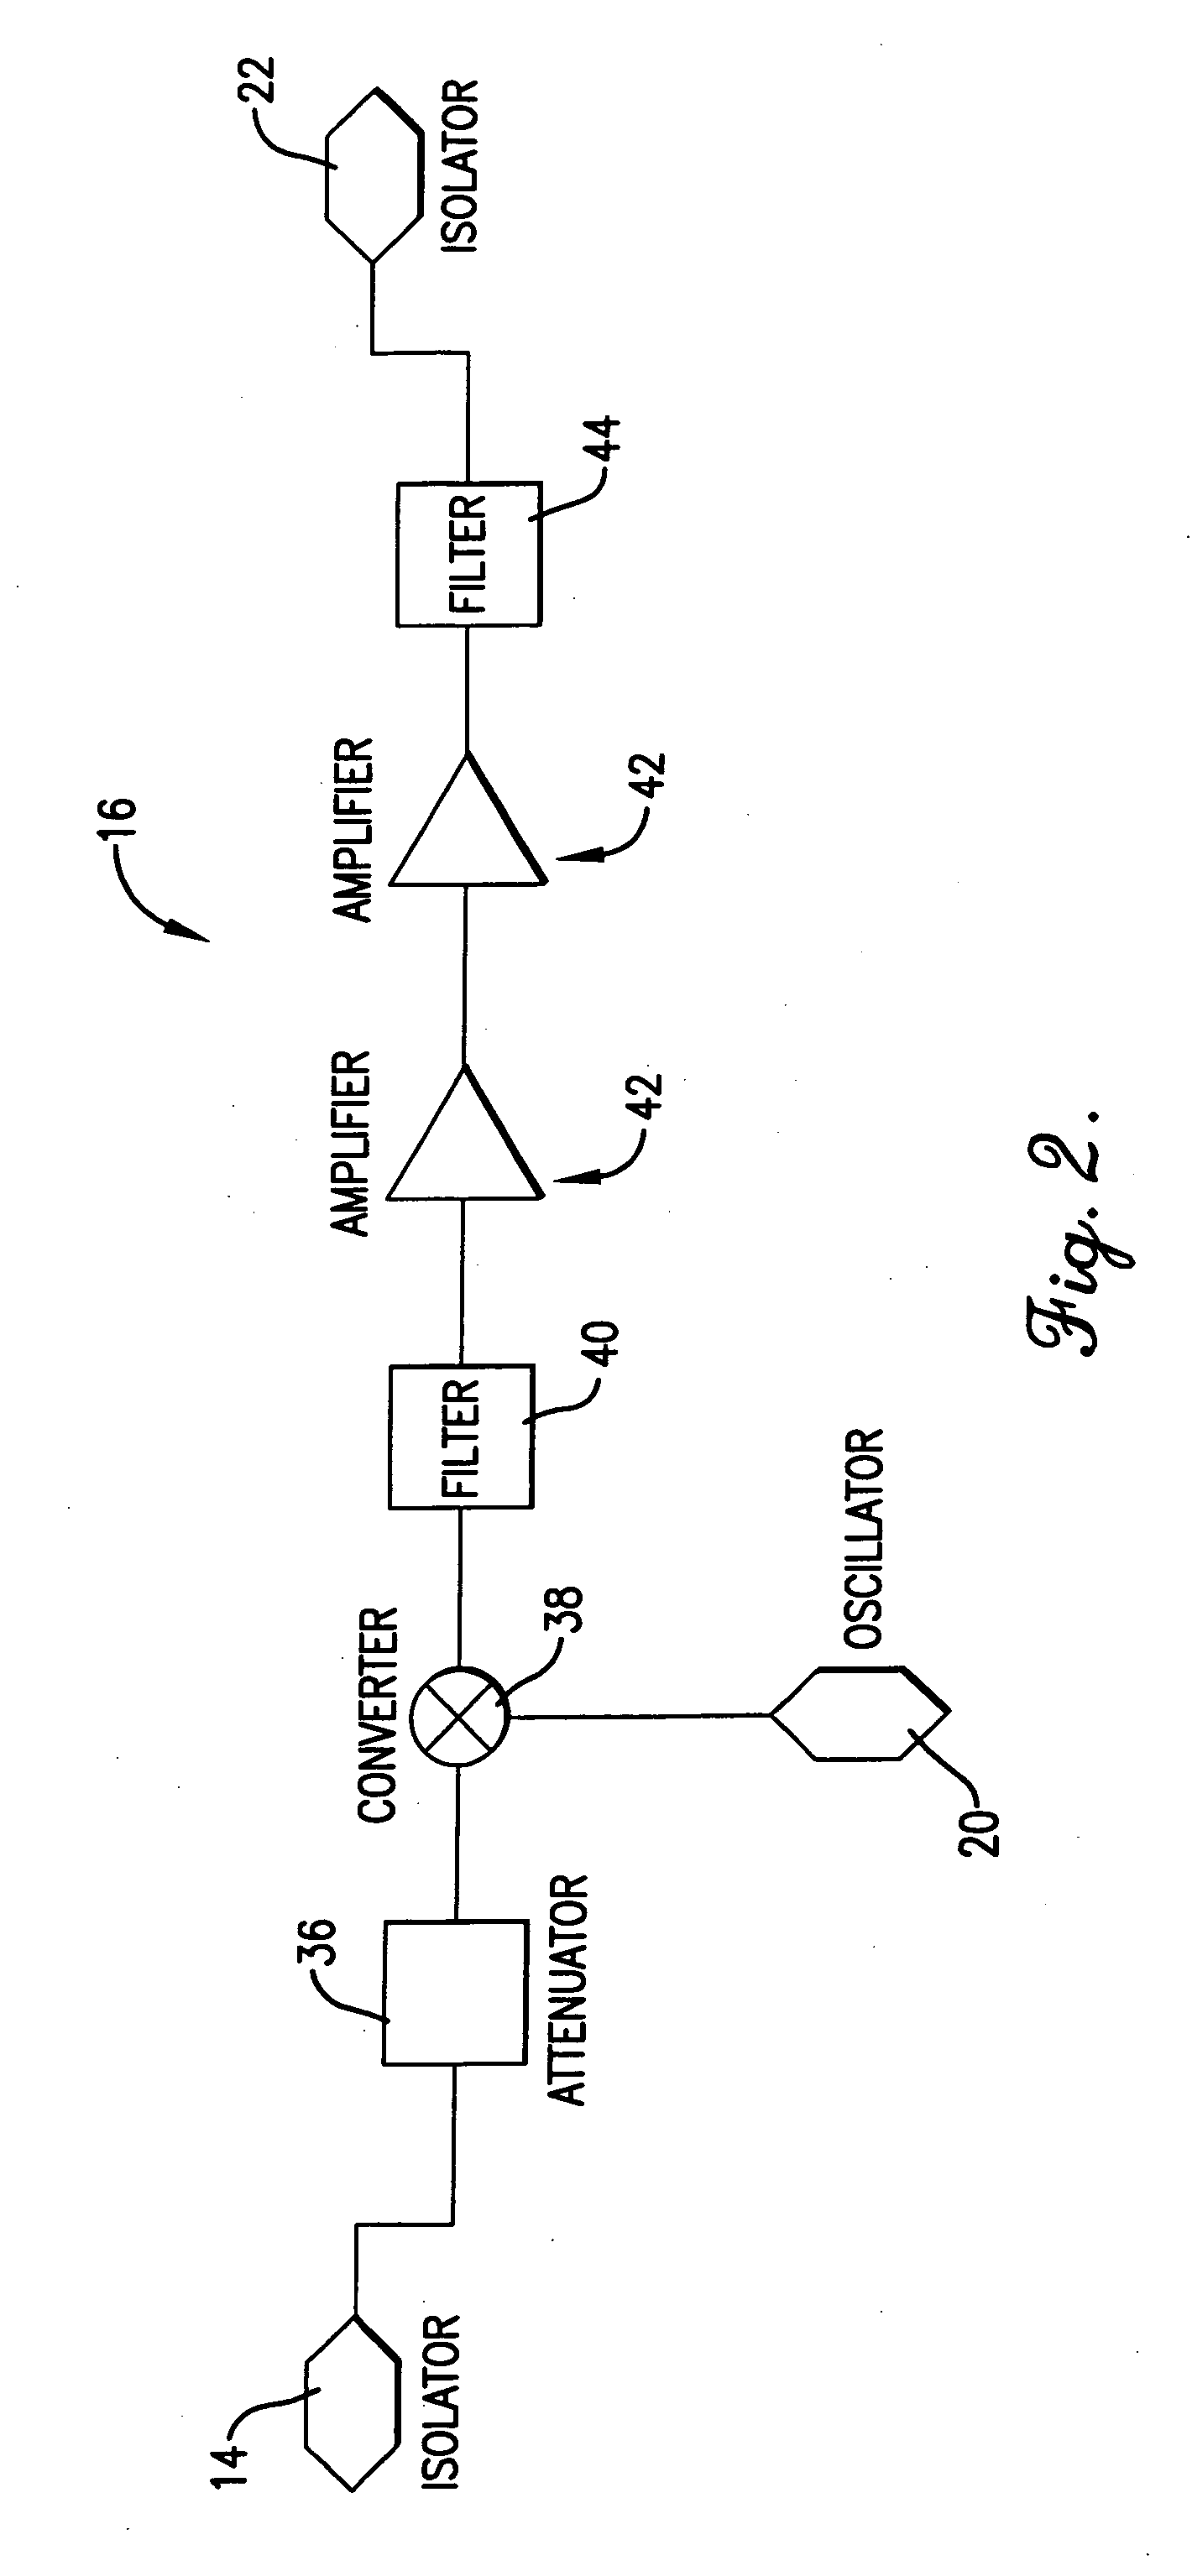 ISM band to U-NII band frequency transverter and method of frequency transversion